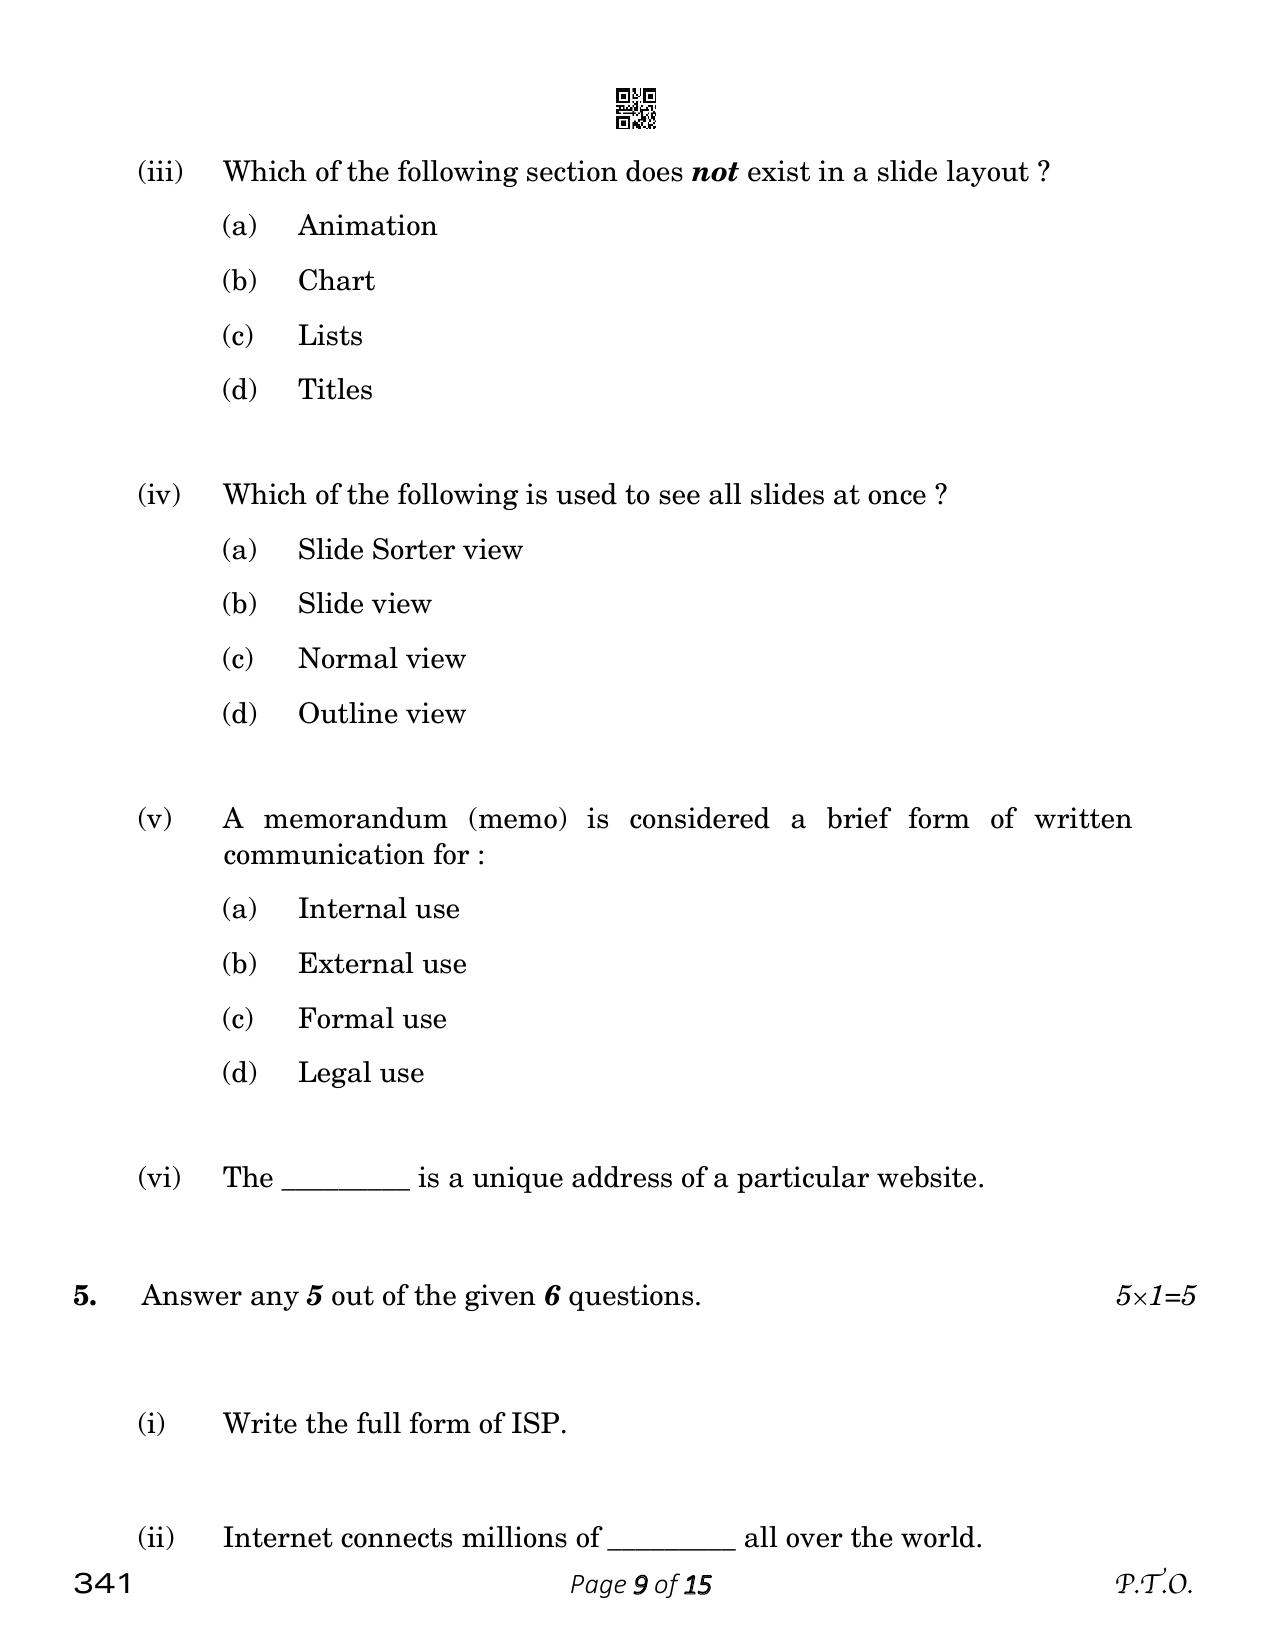 CBSE Class 12 Typography & Computer Applications (Compartment) 2023 Question Paper - Page 9